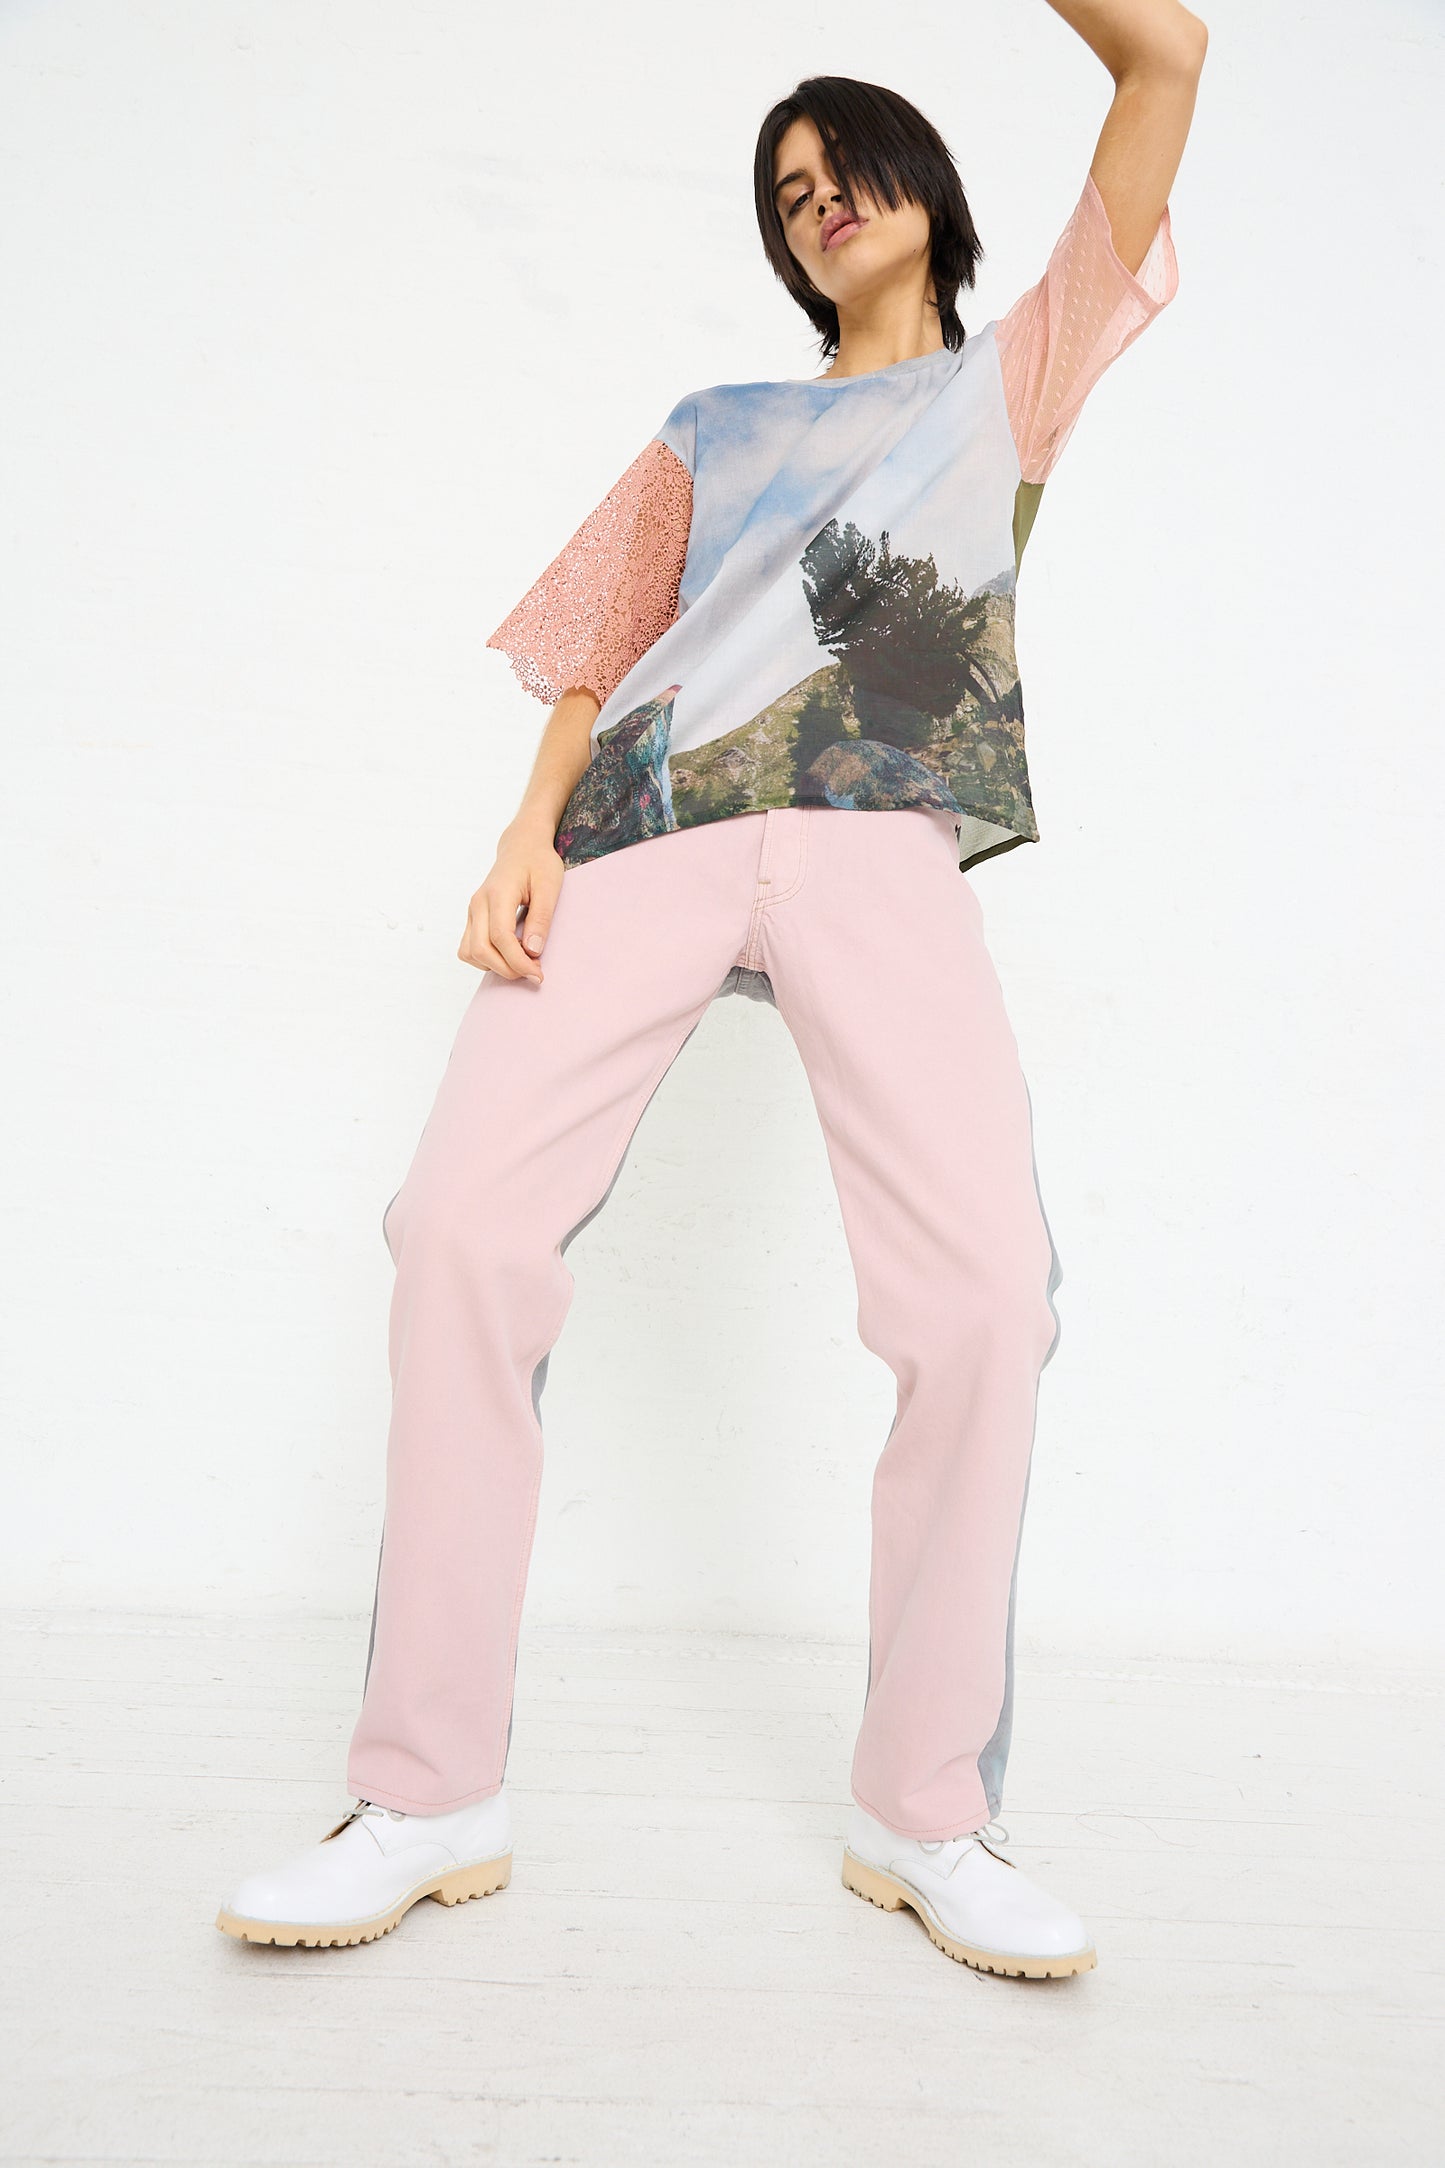 Woman in an up-cycled Bless vintage denim tee and No. 73 Jeanspleatfront trousers in Pink/Grey posing against a white background.